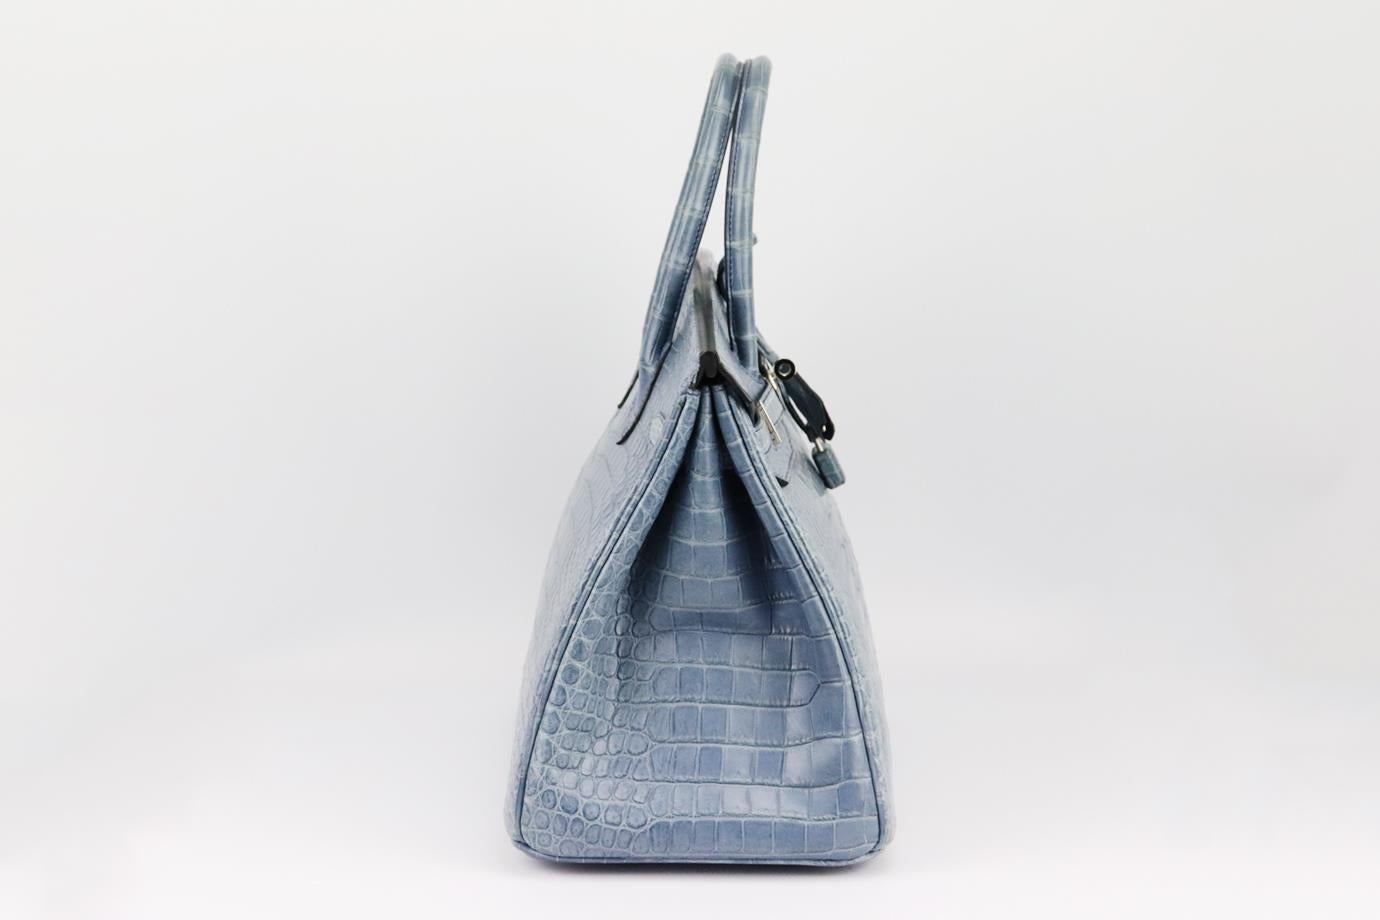 Hermès 2010 Birkin 35cm matte Crocodile Porosus leather bag. Made in France, this beautiful 2010 Hermès ‘Birkin’ handbag has been made from dusty-blue ‘Crocodile Porosus’ exterior in ‘Bleu Jean’ with matching leather interior, this piece is